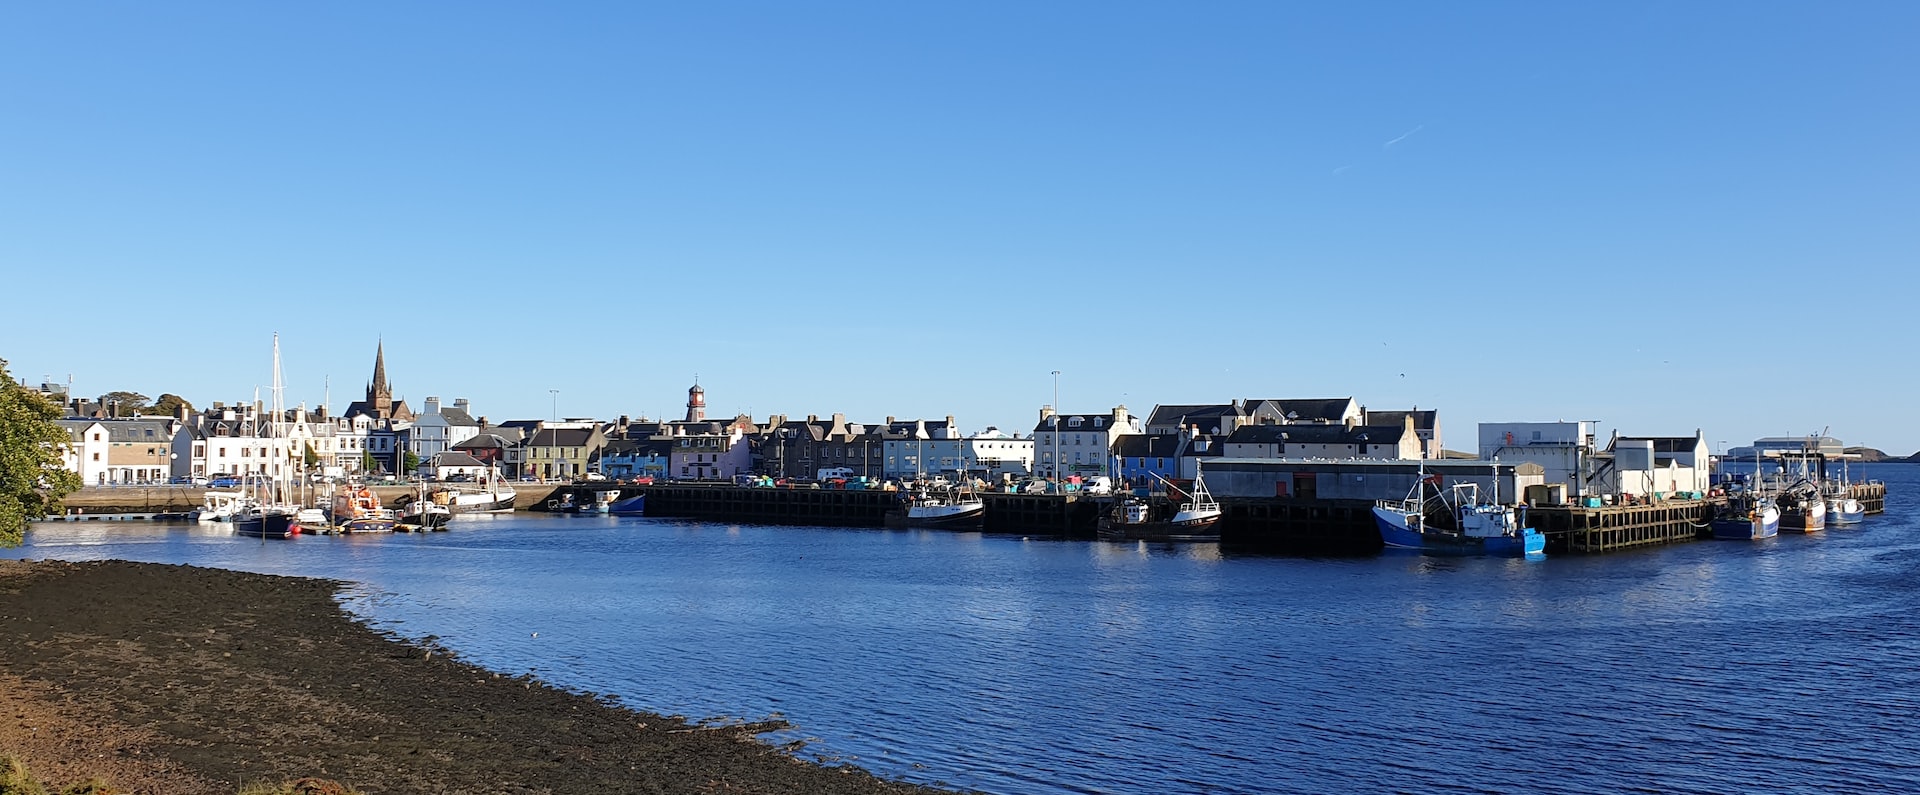 HIE invests £4.25 million in Outer Hebrides in 2022